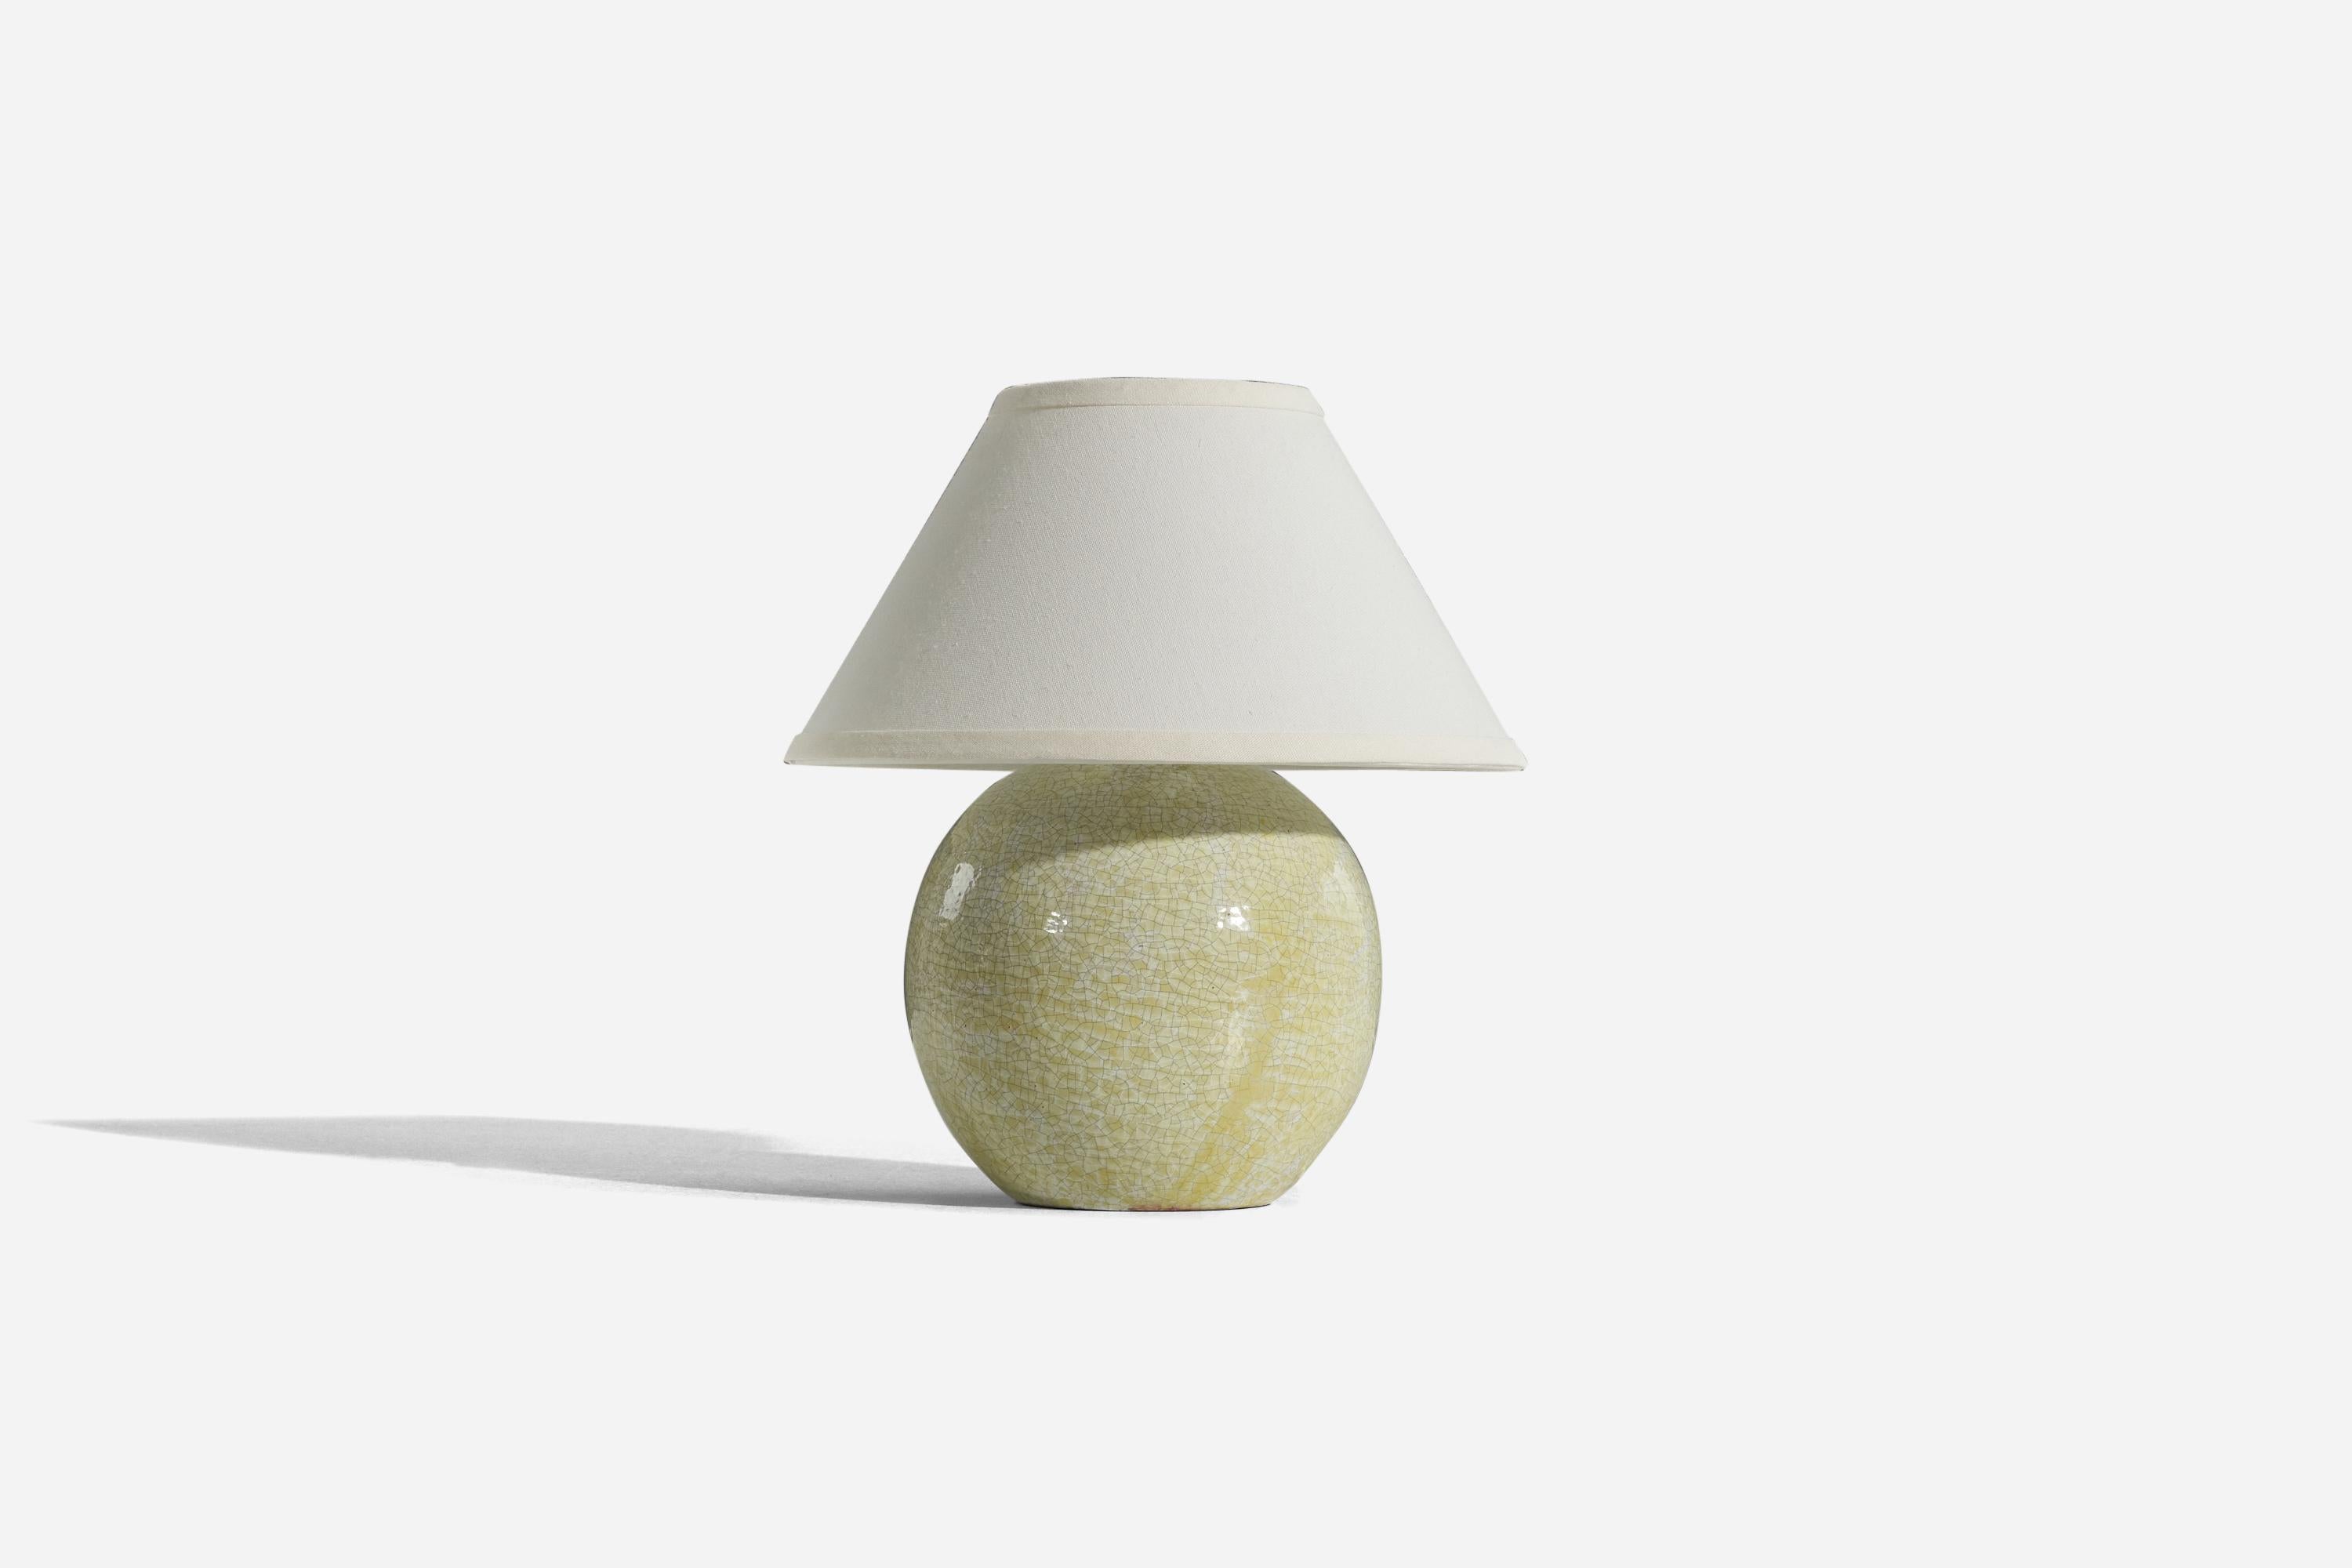 A light green stoneware table lamp designed and produced by Stockholms Keramik, Sweden, c. 1930s. 

Sold without lampshade. 
Dimensions of Lamp (inches) : 10.37 x 7.93 x 7.93 (H x W x D)
Dimensions of Shade (inches) : 5.25 x 12.25 x 7.25 (T x B